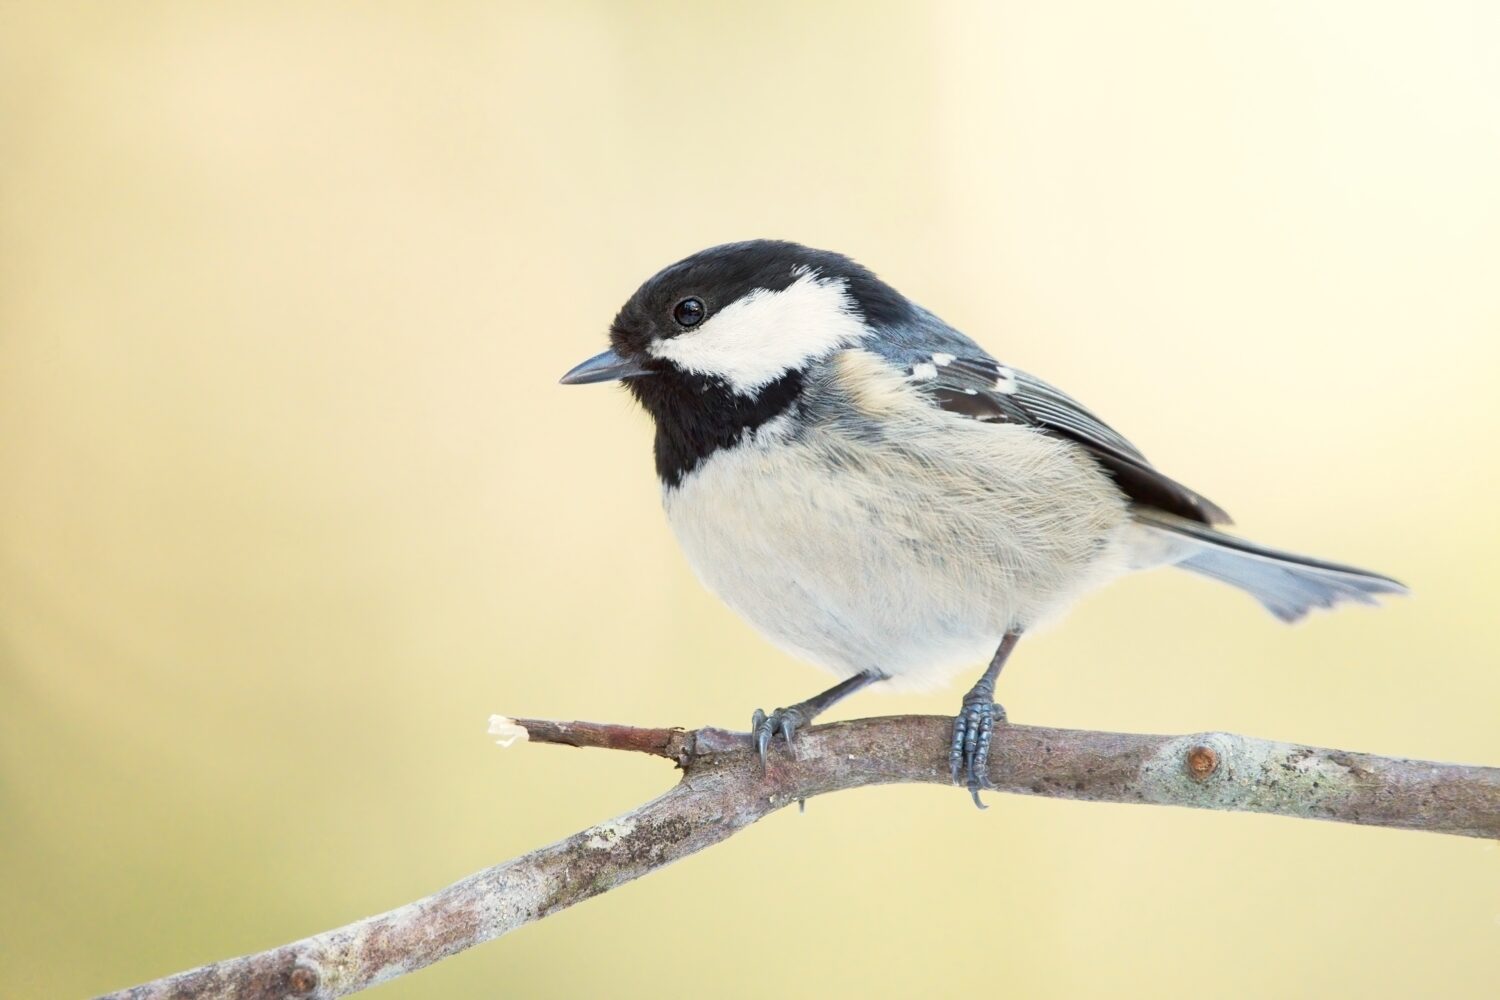 Coal tit (Periparus ater) sitting on a branch in forest.